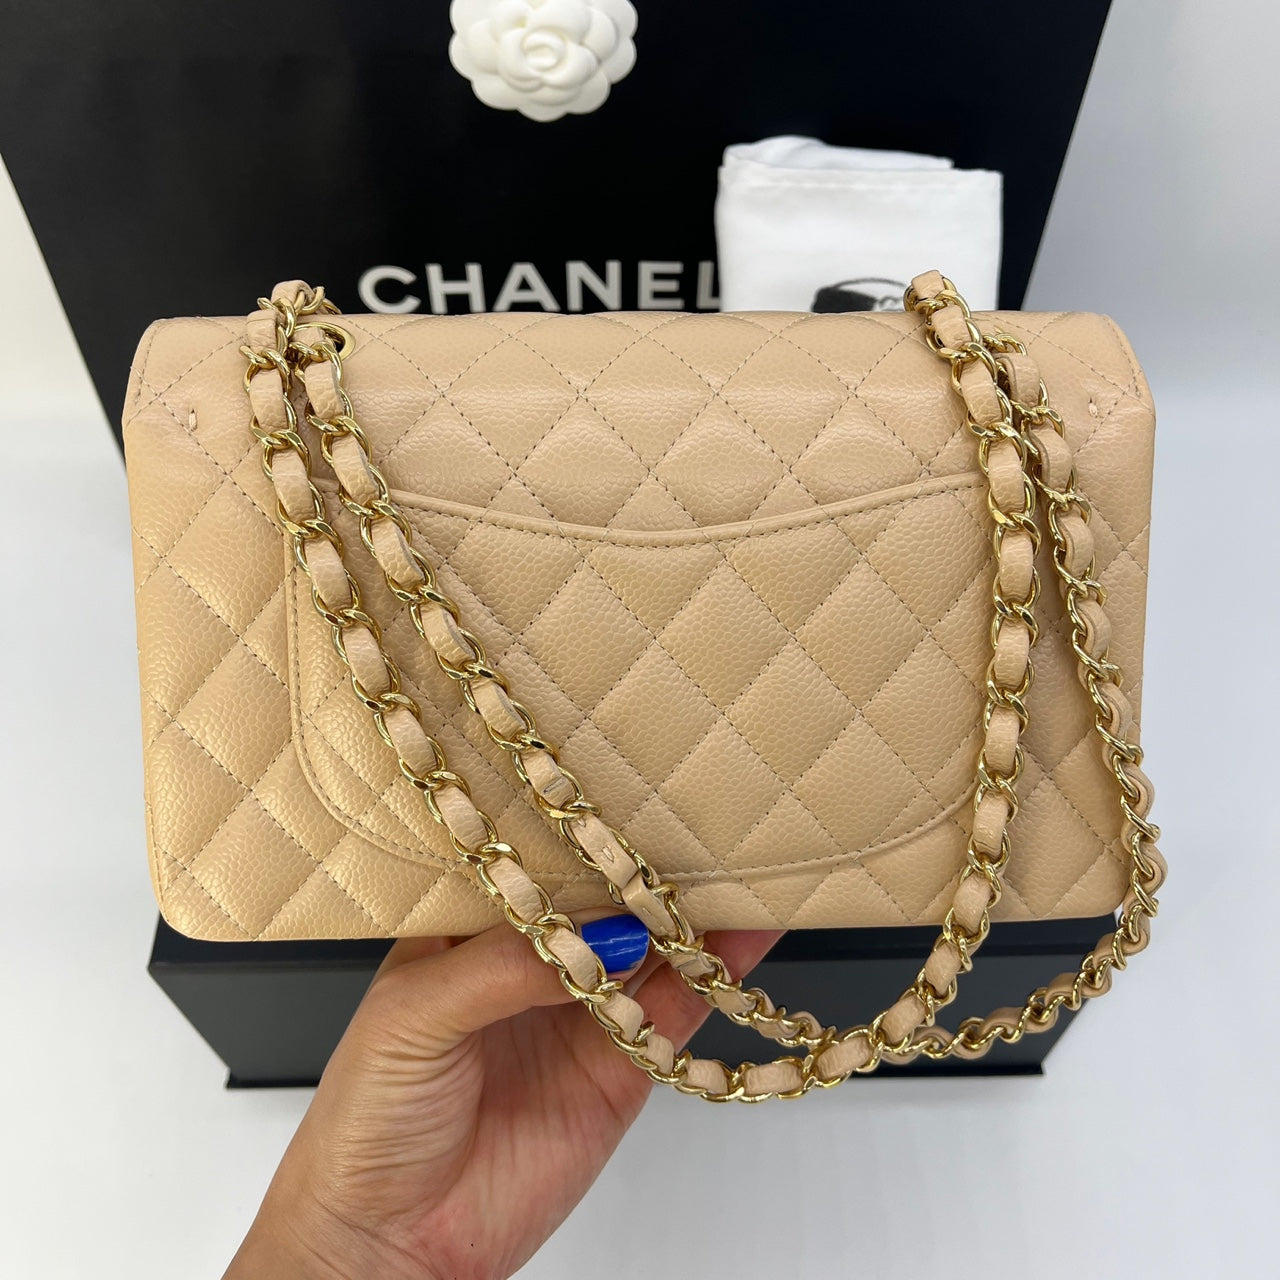 chanel handbags for women clearance sale under 100